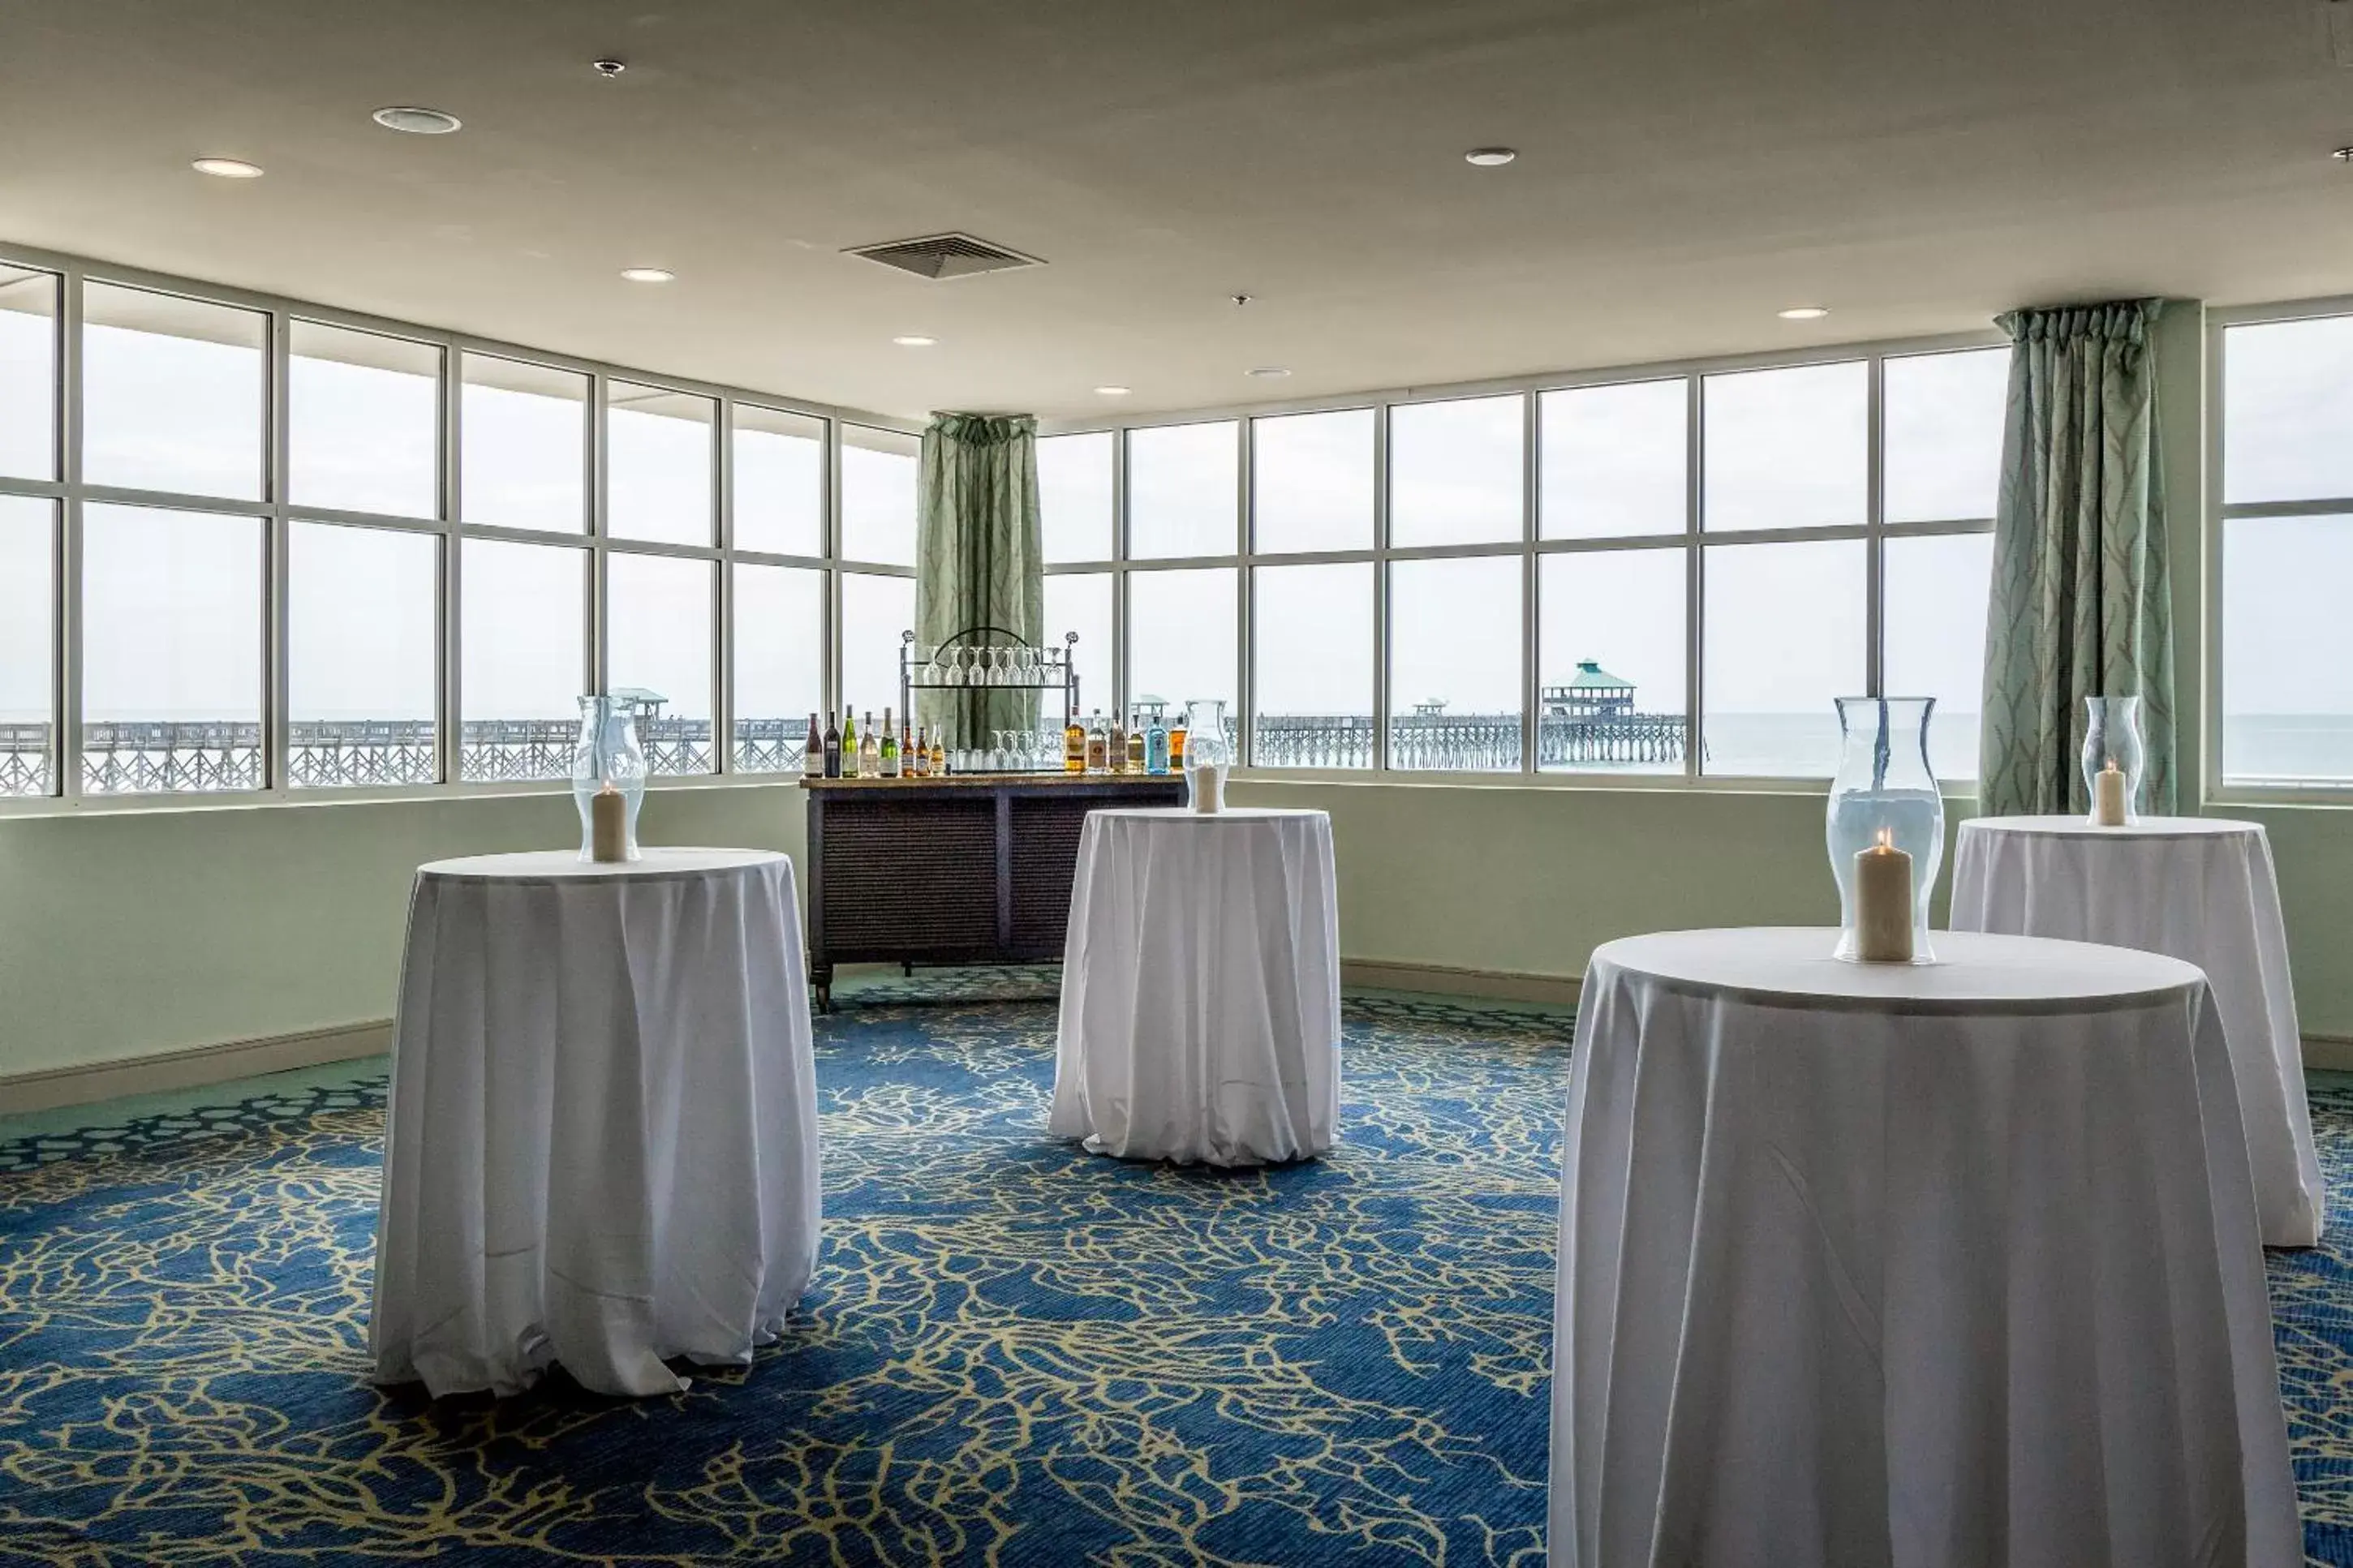 Banquet/Function facilities in Tides Folly Beach